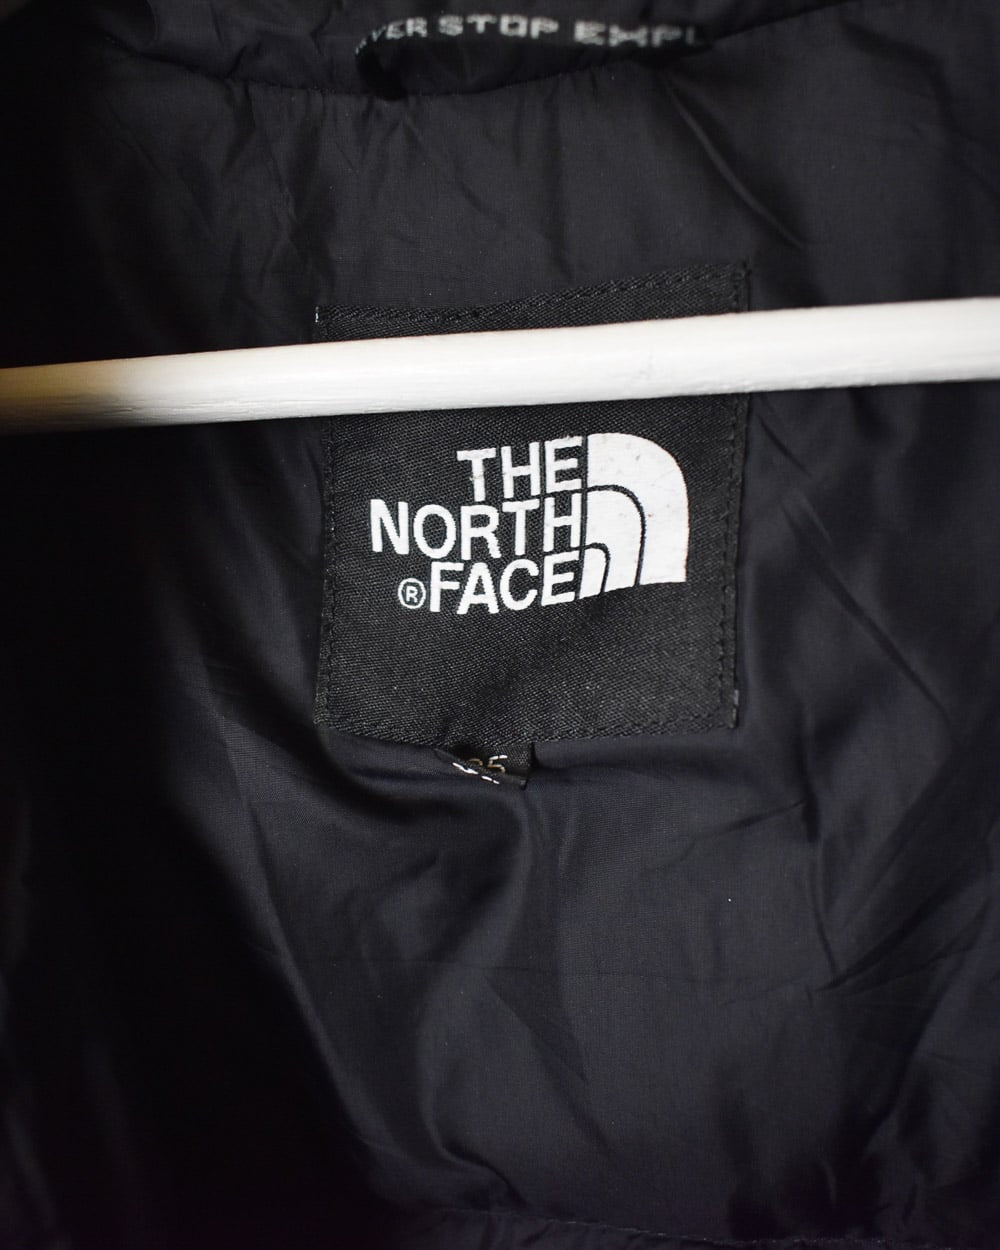 Navy The North Face Nuptse 700 Down Puffer Jacket - X-Small